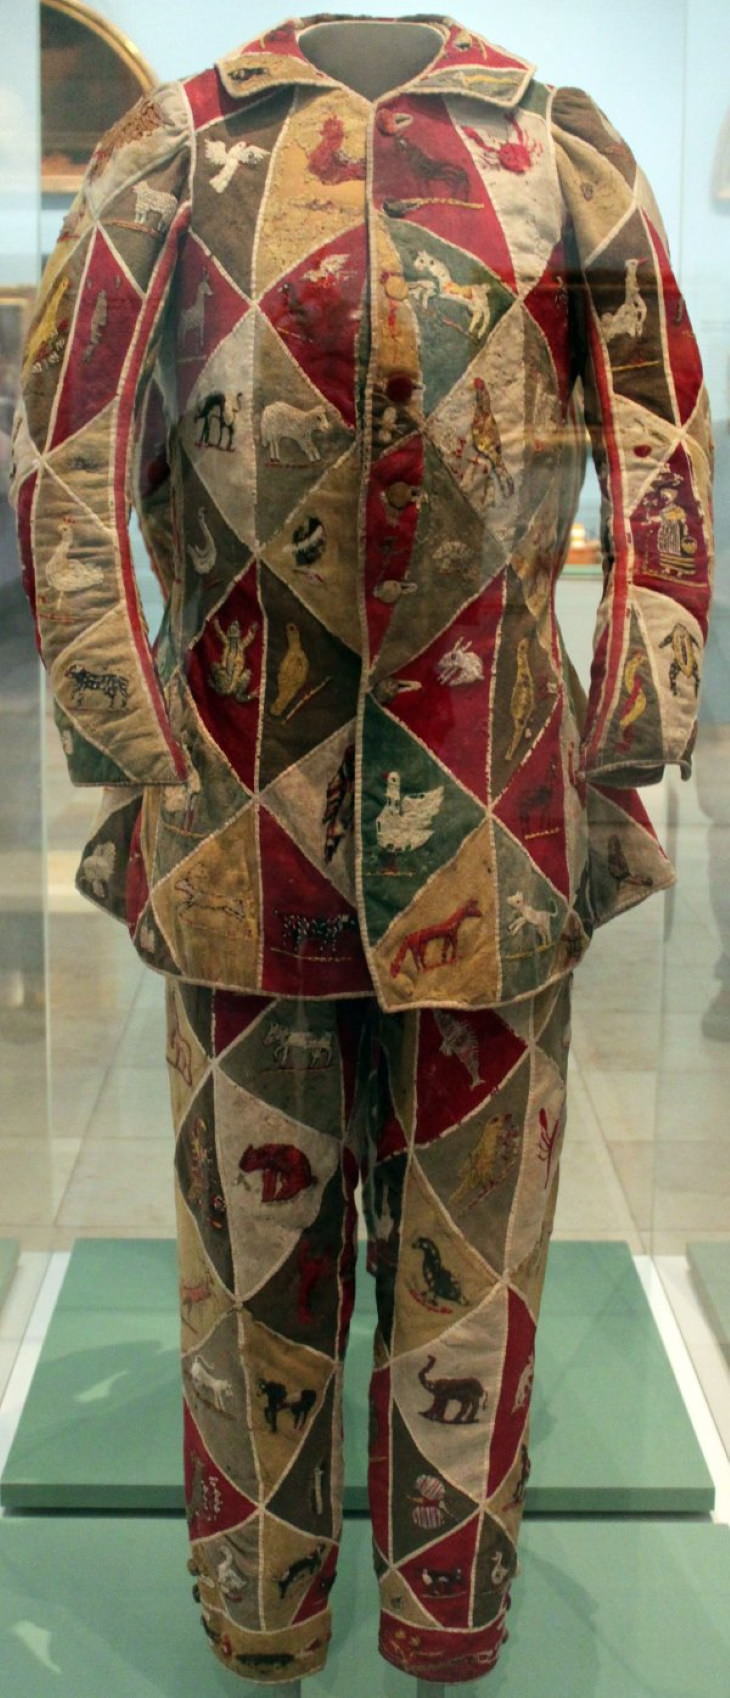 Archeological Finds 18th-century costume of a harlequin